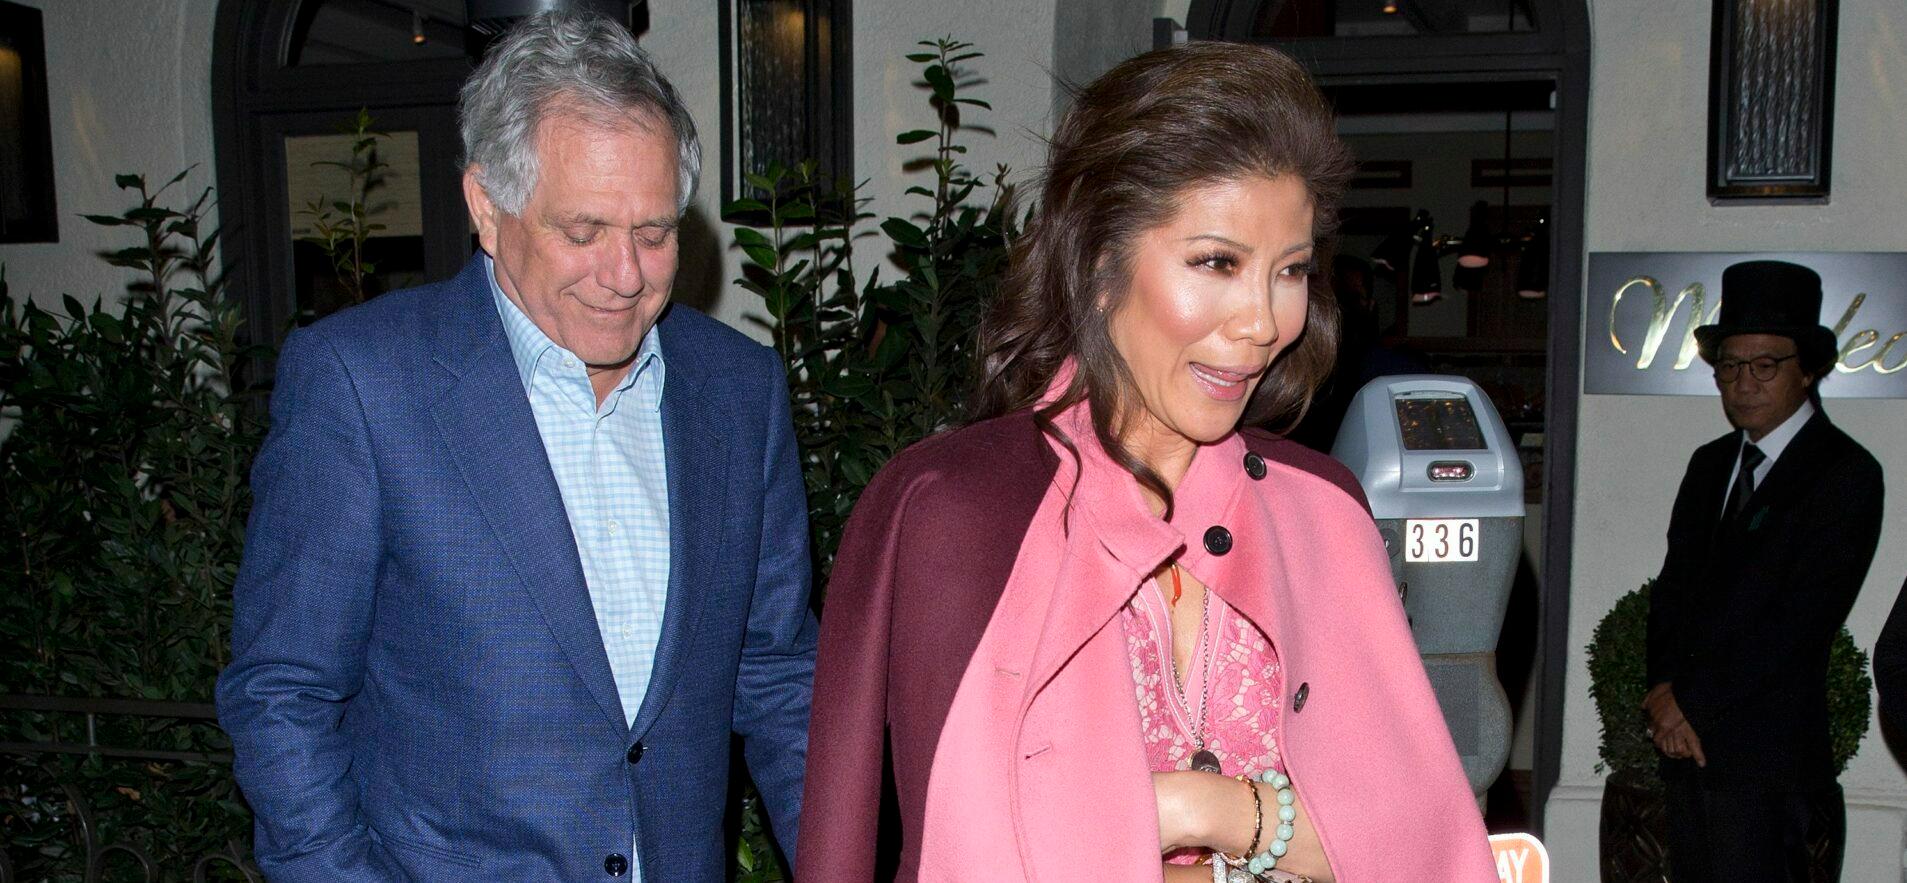 Big Brother Host Julie Chen Moonves and Les Moonves